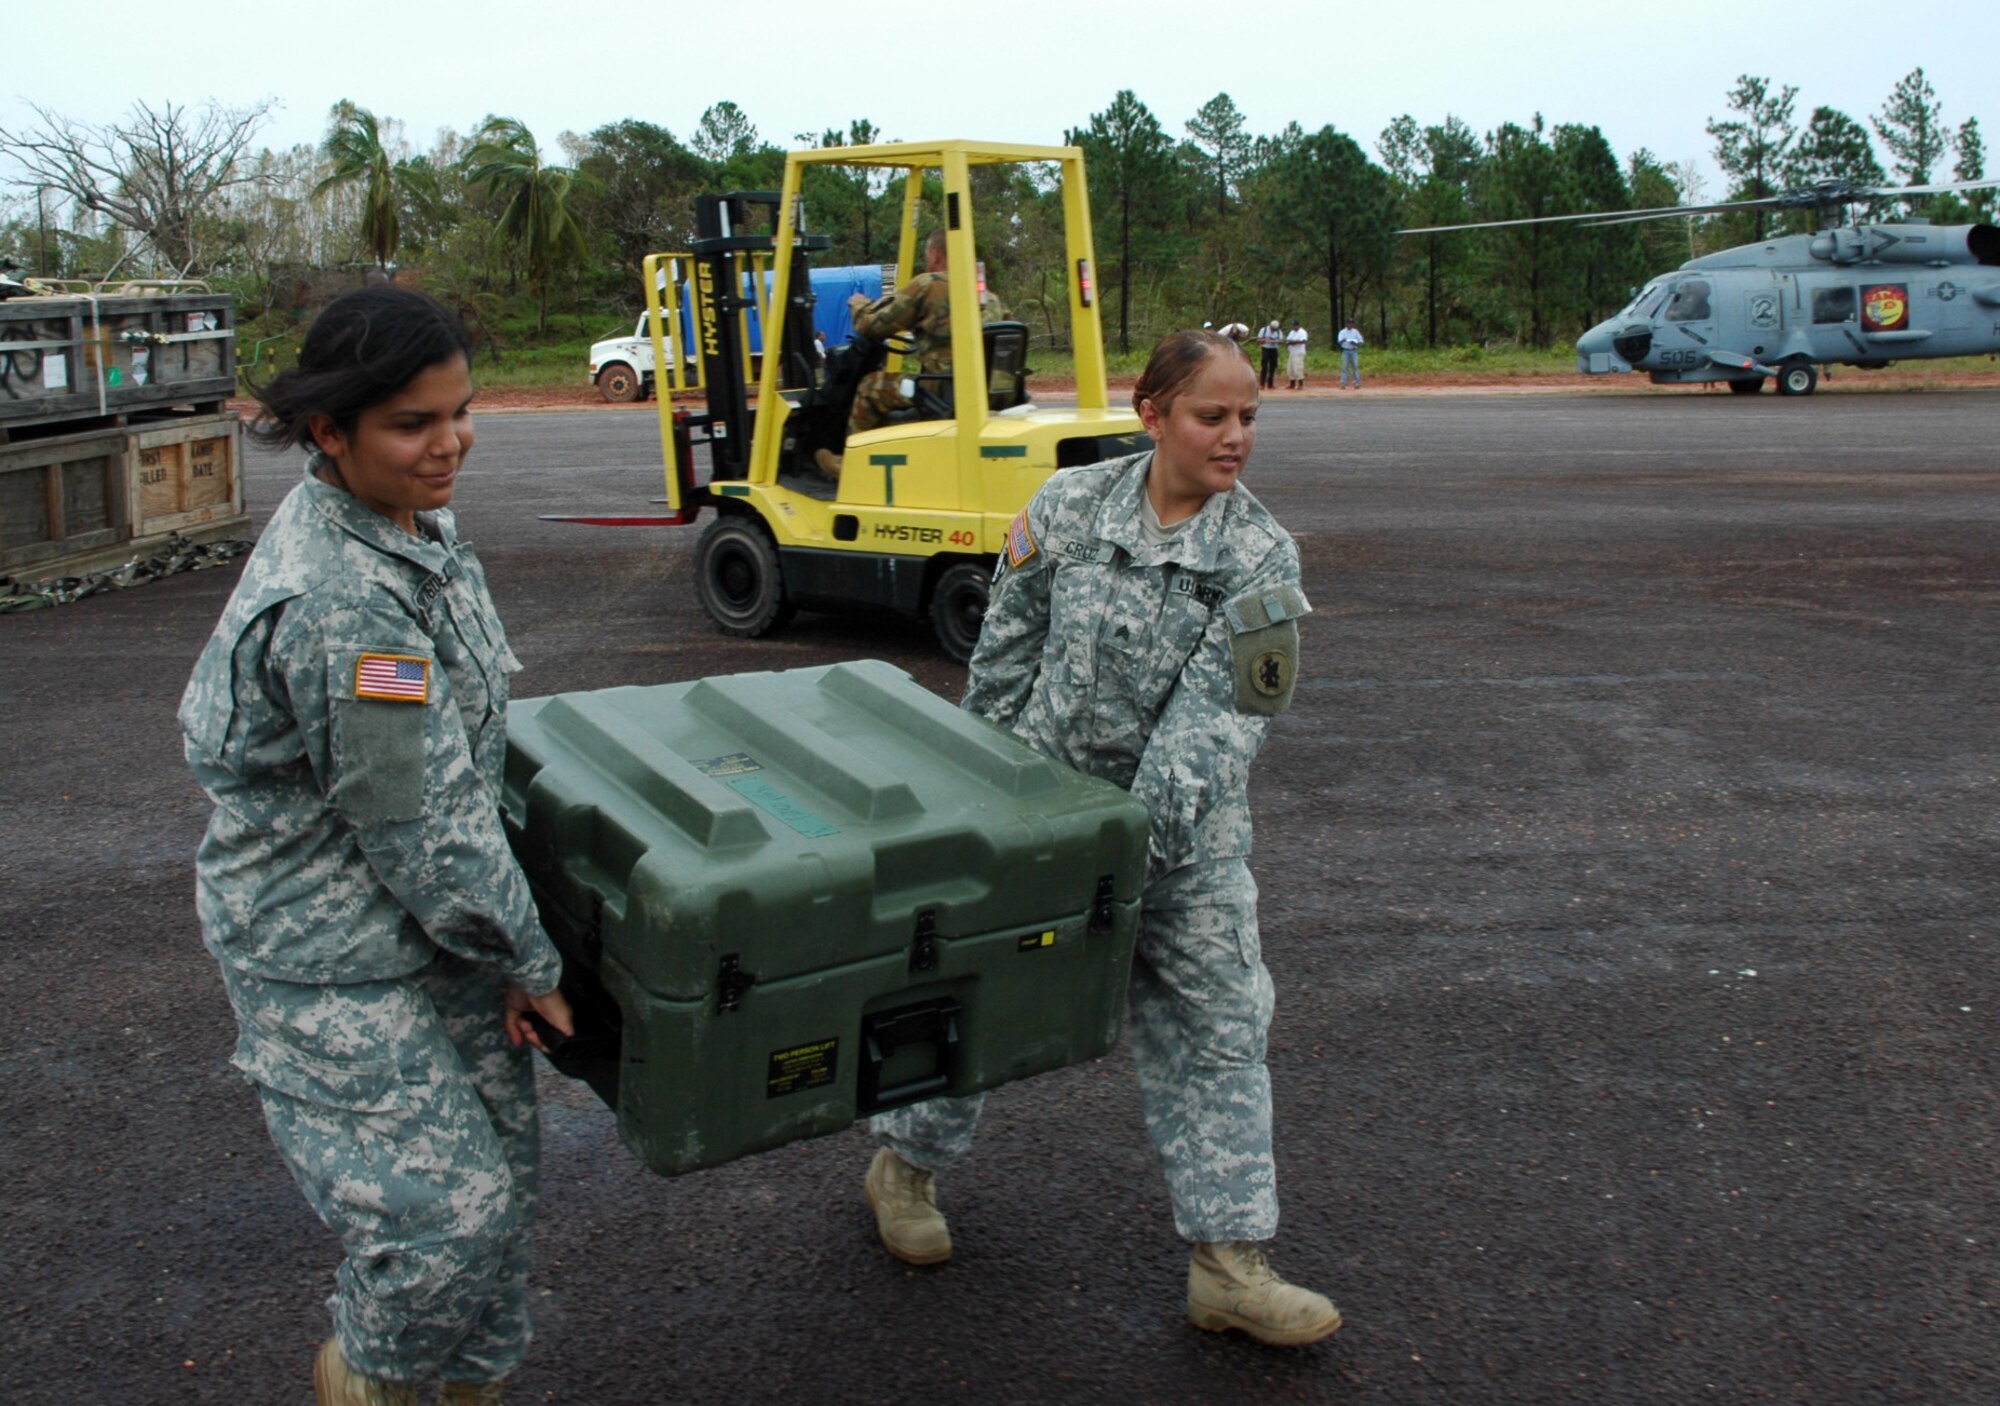 PUERTO CABEZAS, Nicaragua – Specialist Guadalupe Rodriguez and Sgt. Lisena Cruz move equipment to help set up a command and control center here Sept. 15.  Both women are deployed here from Joint Task Force Bravo in Honduras to help support Hurricane Felix relief operations.  The U.S. State Department and Department of Defense are working together to bring food, water and other needed items to small communities on the Nicaraguan coast that were affected by the hurricane.  (Army photo by Specialist Grant Vaught)